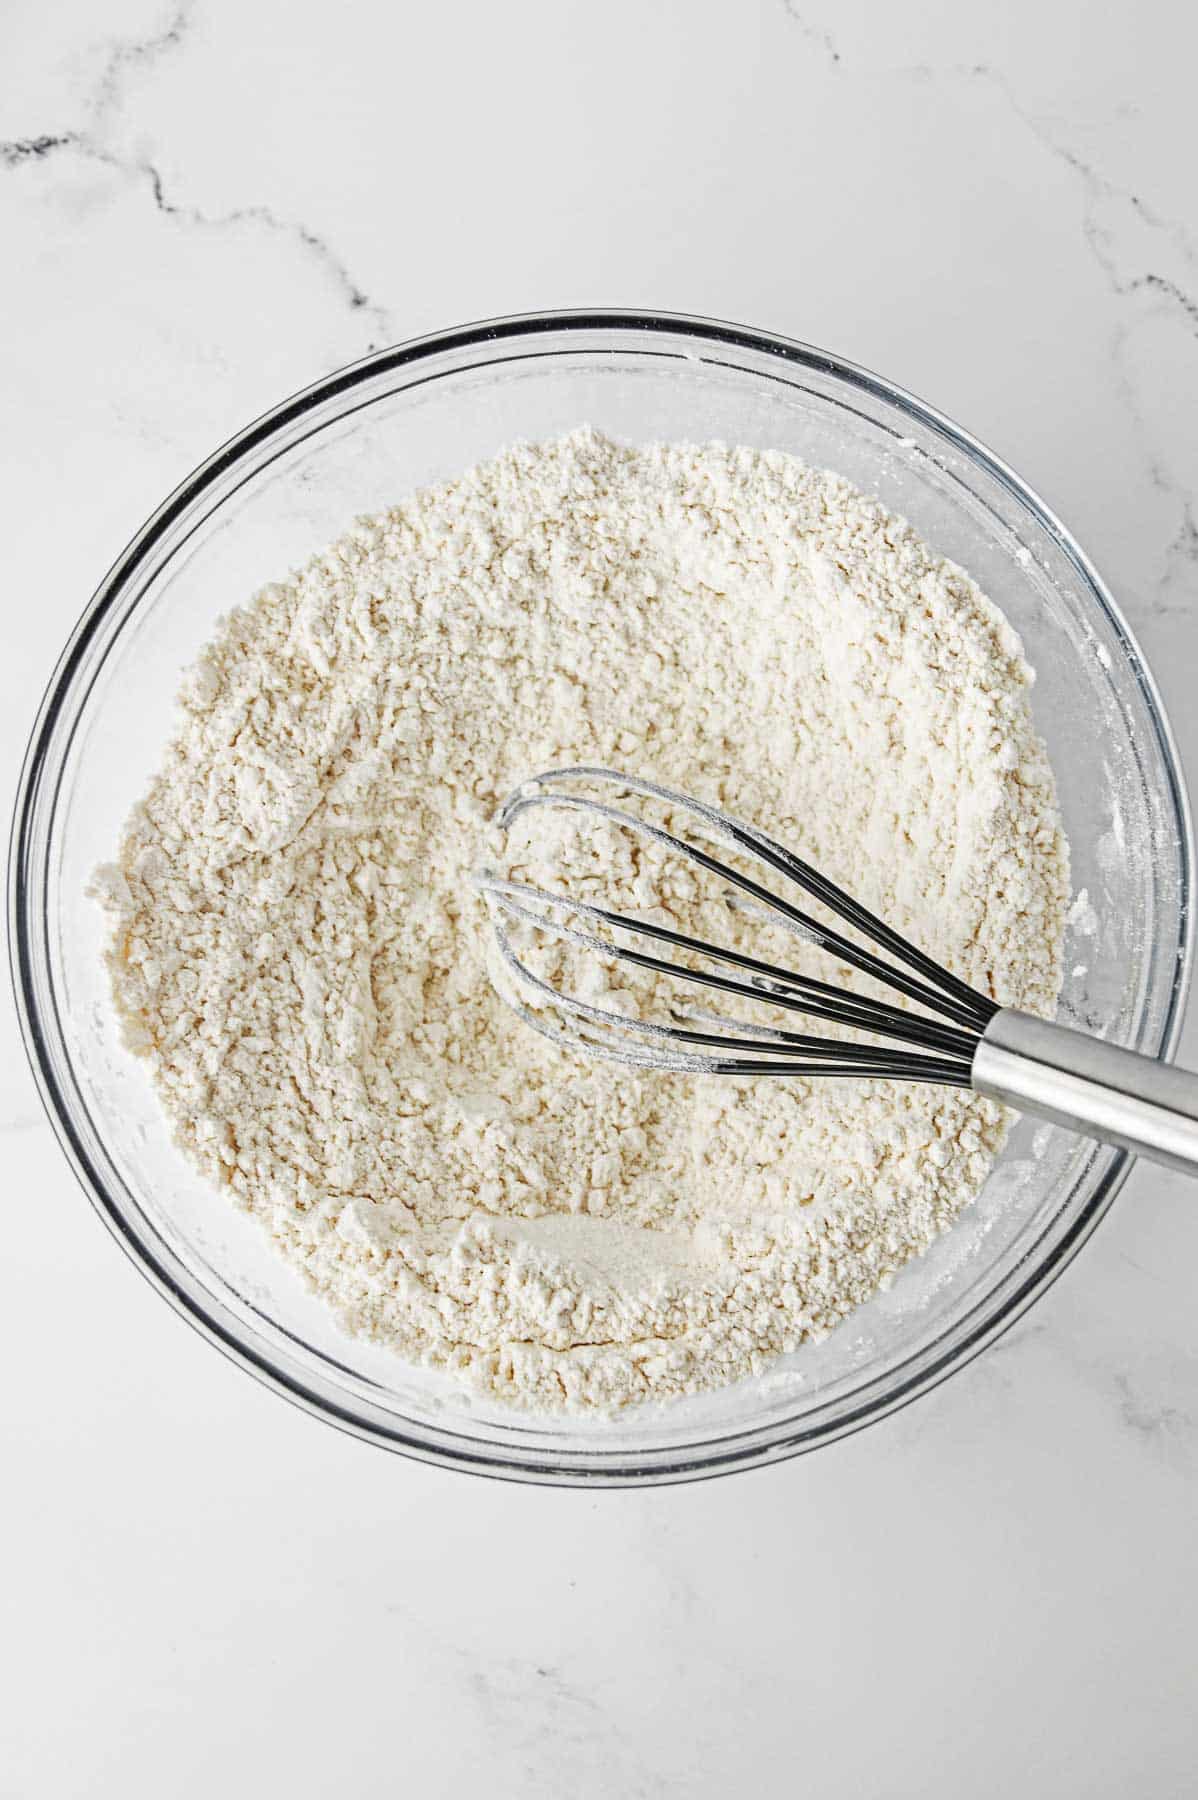 a glass mixing bowl with flour and a whisk.